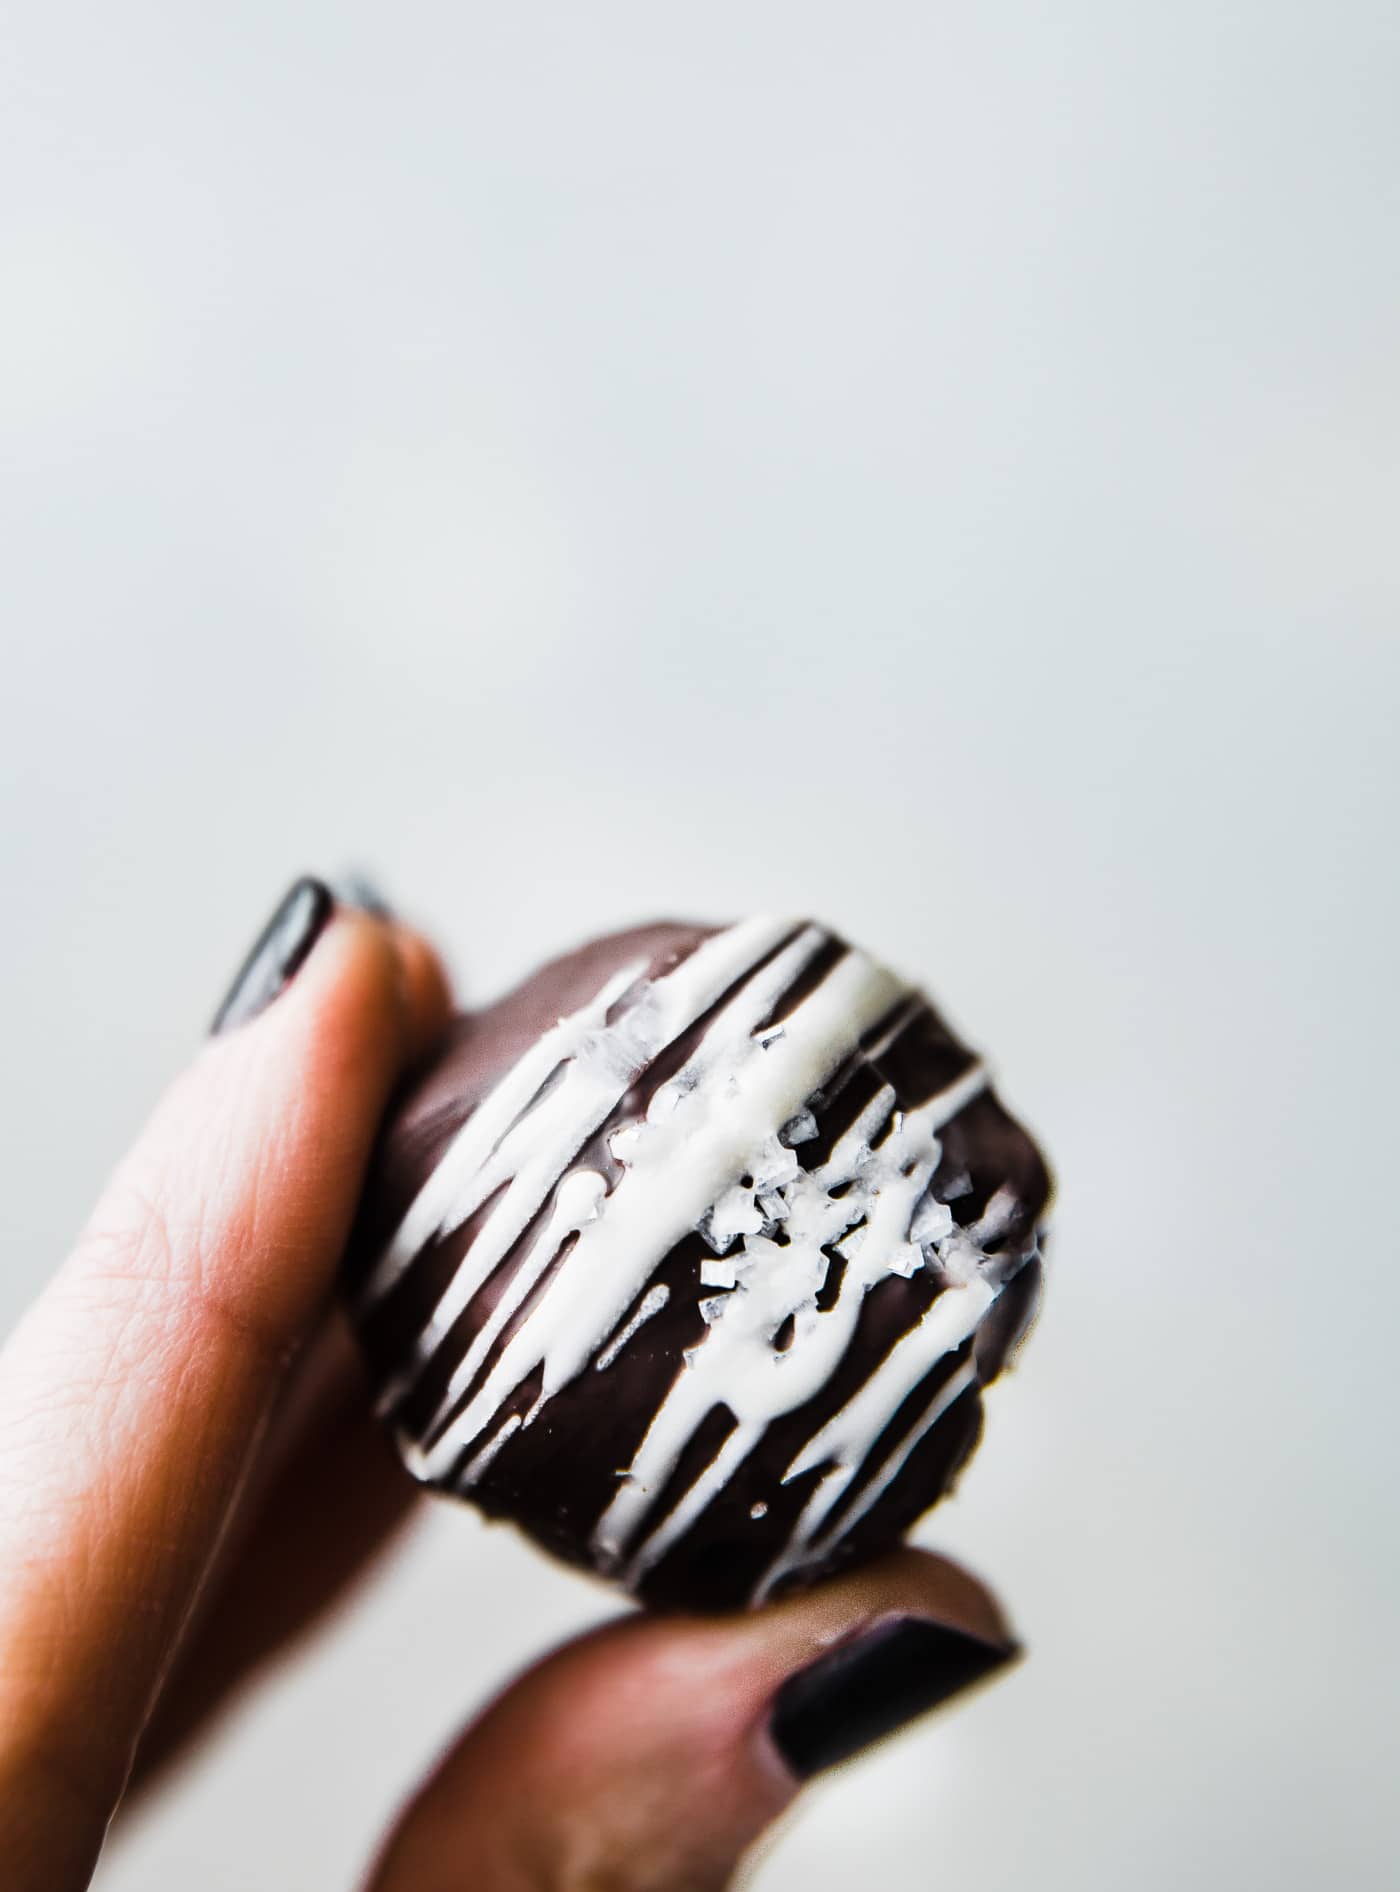 A single chocolate covered cookie truffle being held between thumb and forefinger.